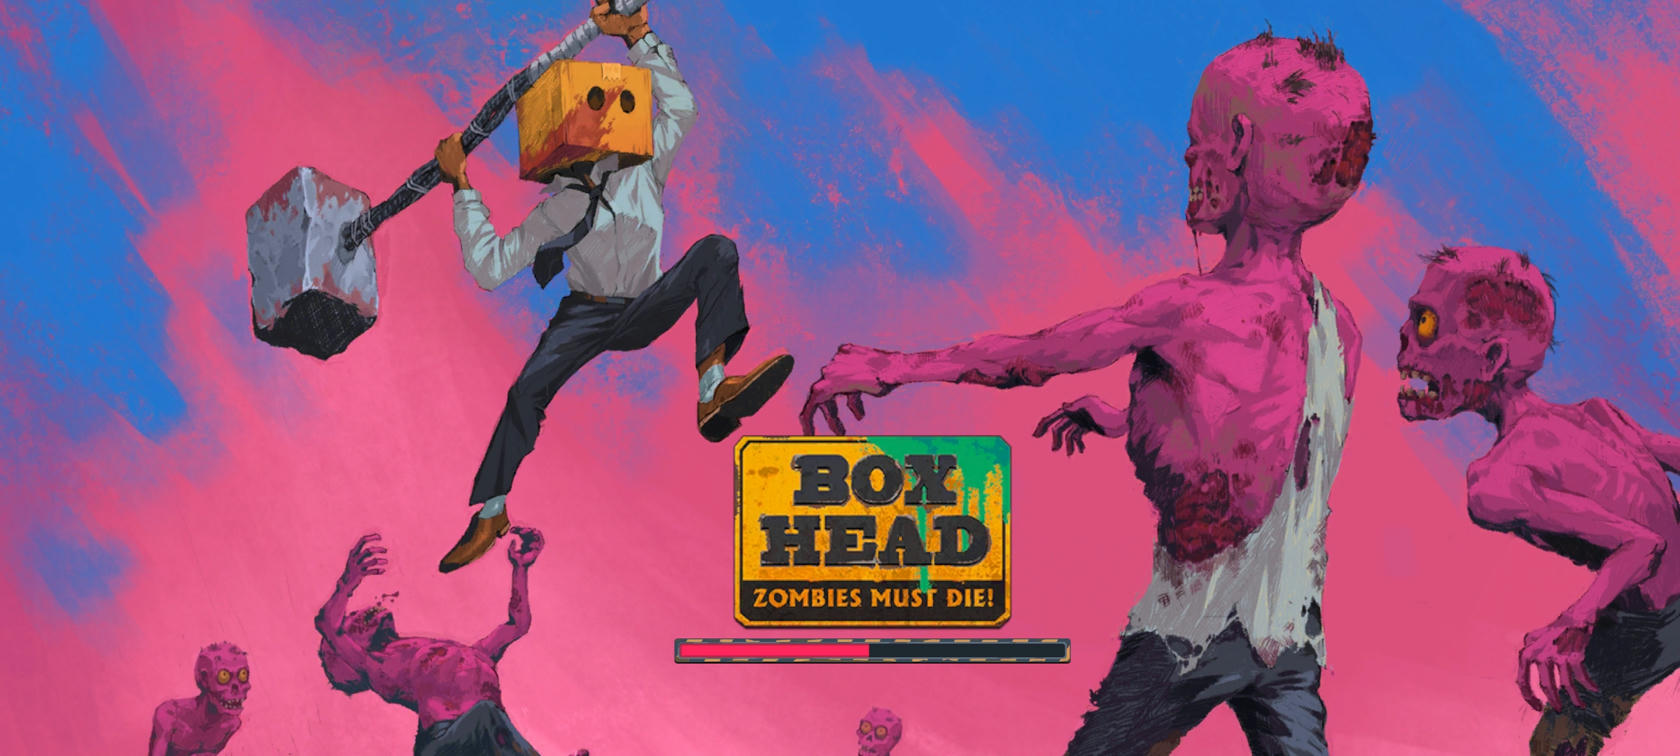 [Game Android] Box Head: Zombies Must Die!